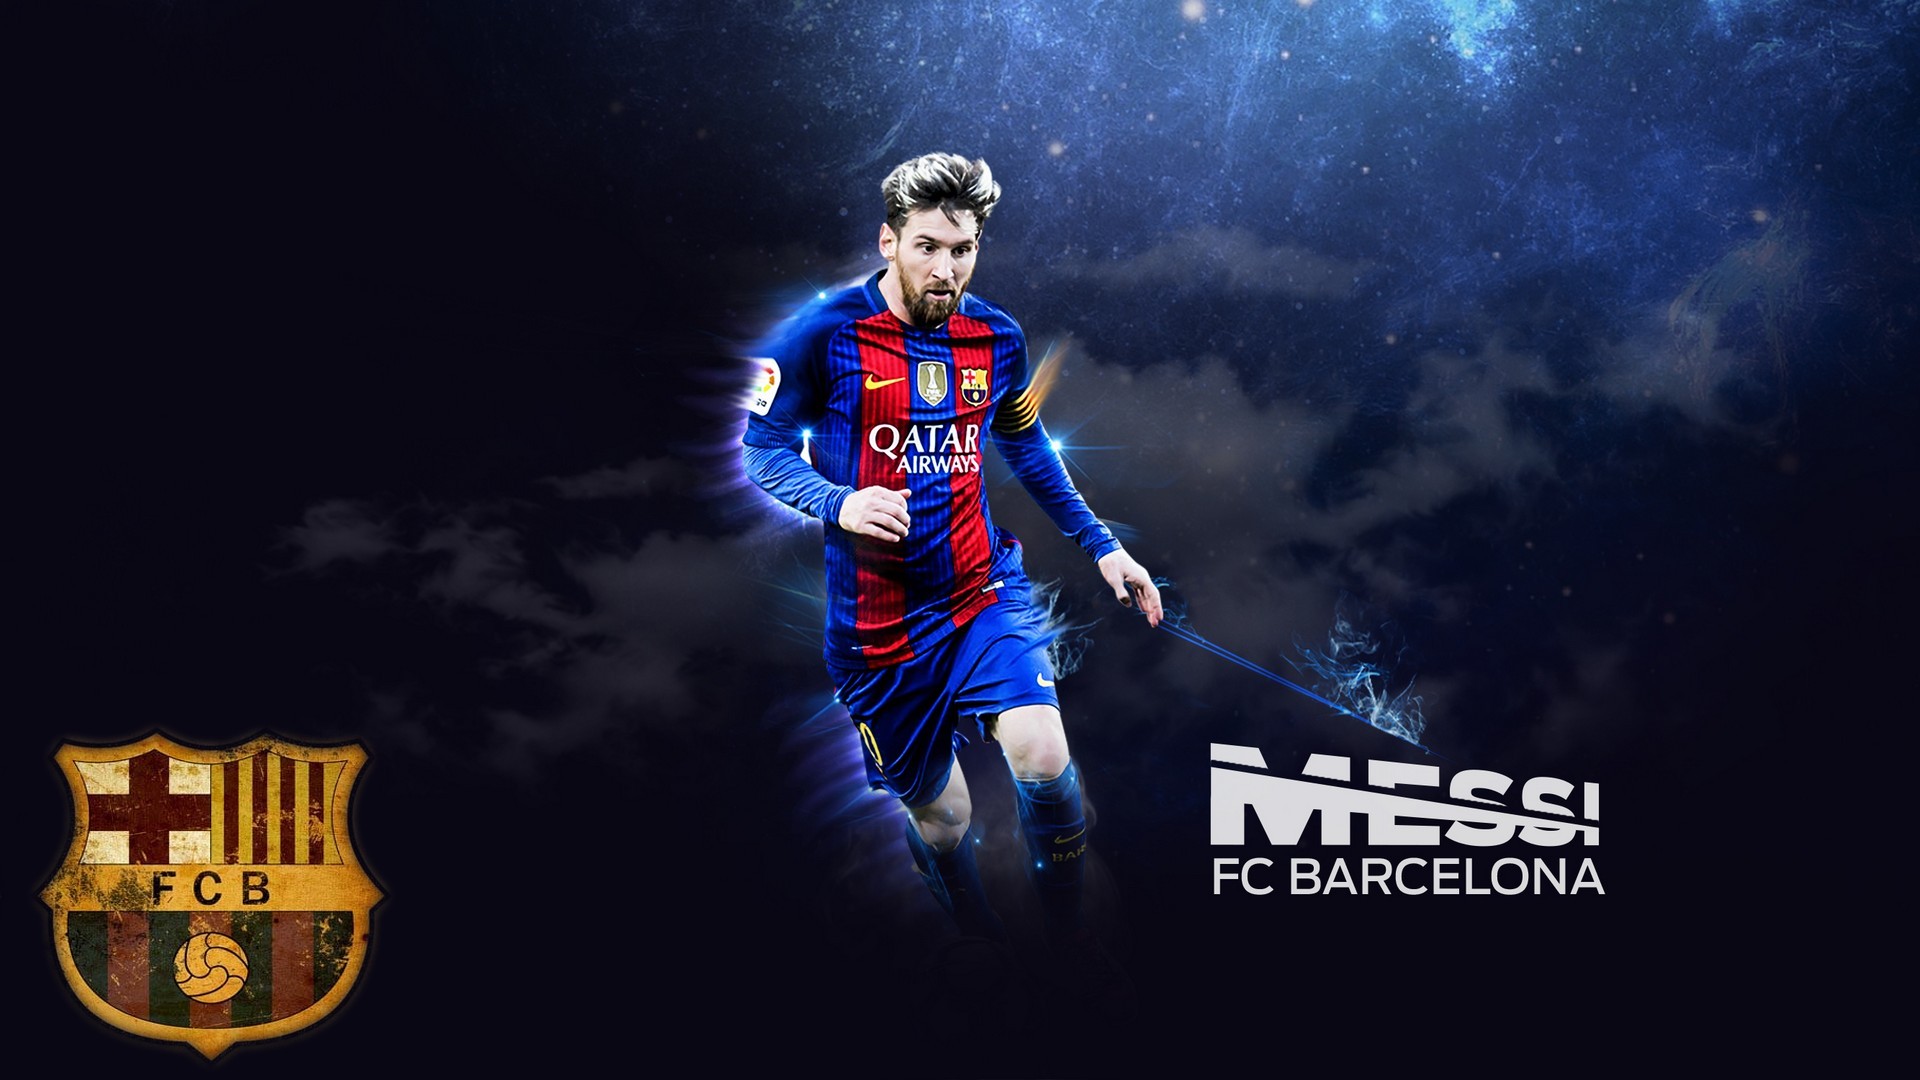 Leo Messi Wallpaper with resolution 1920x1080 pixel. You can make this wallpaper for your Mac or Windows Desktop Background, iPhone, Android or Tablet and another Smartphone device